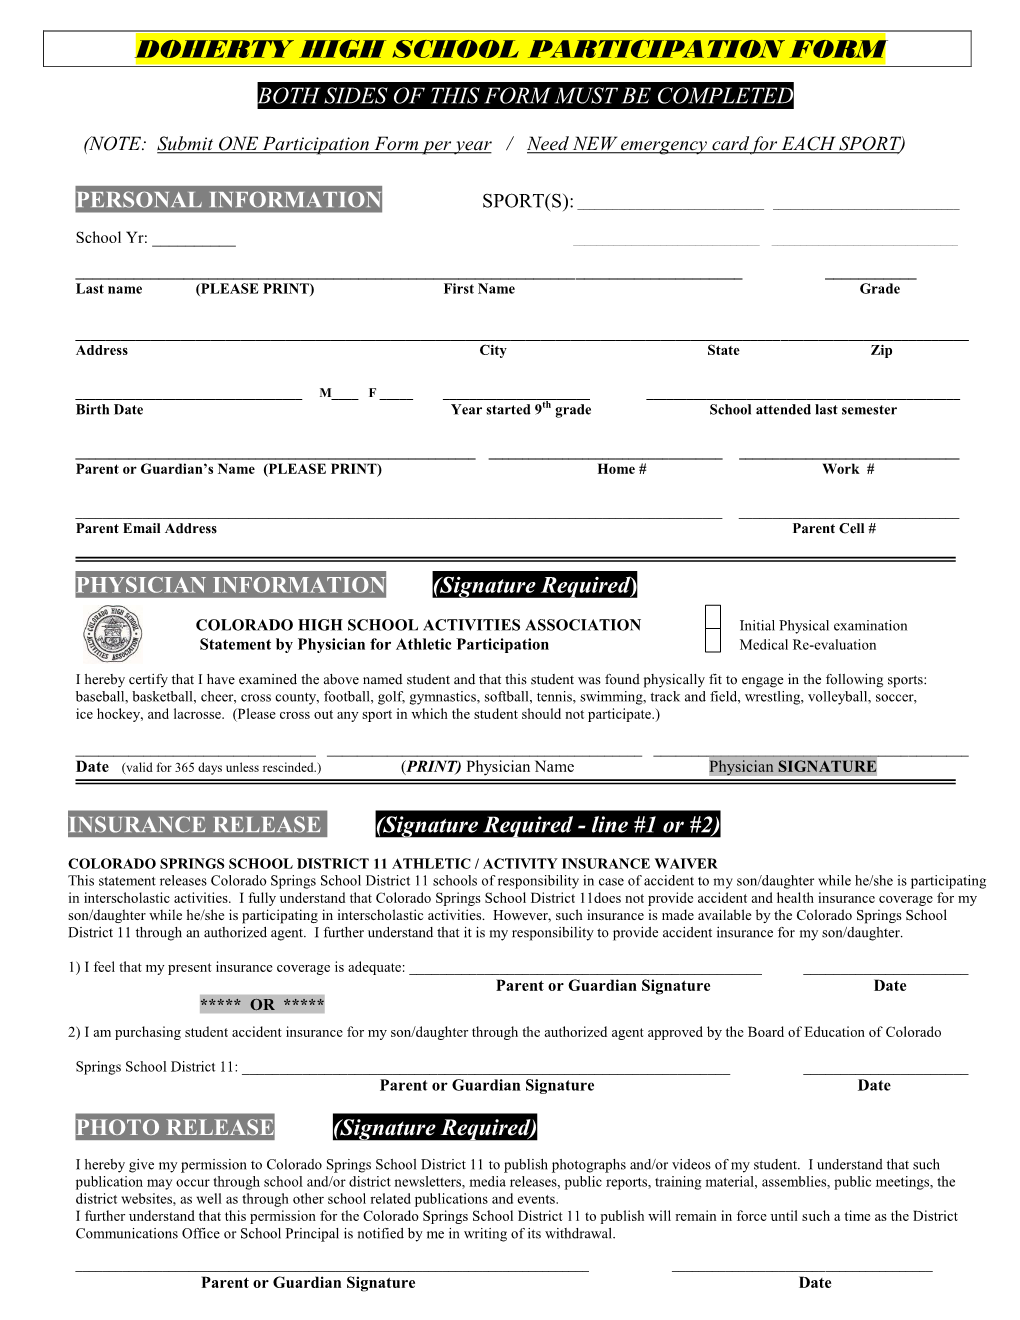 Doherty High School Participation Form